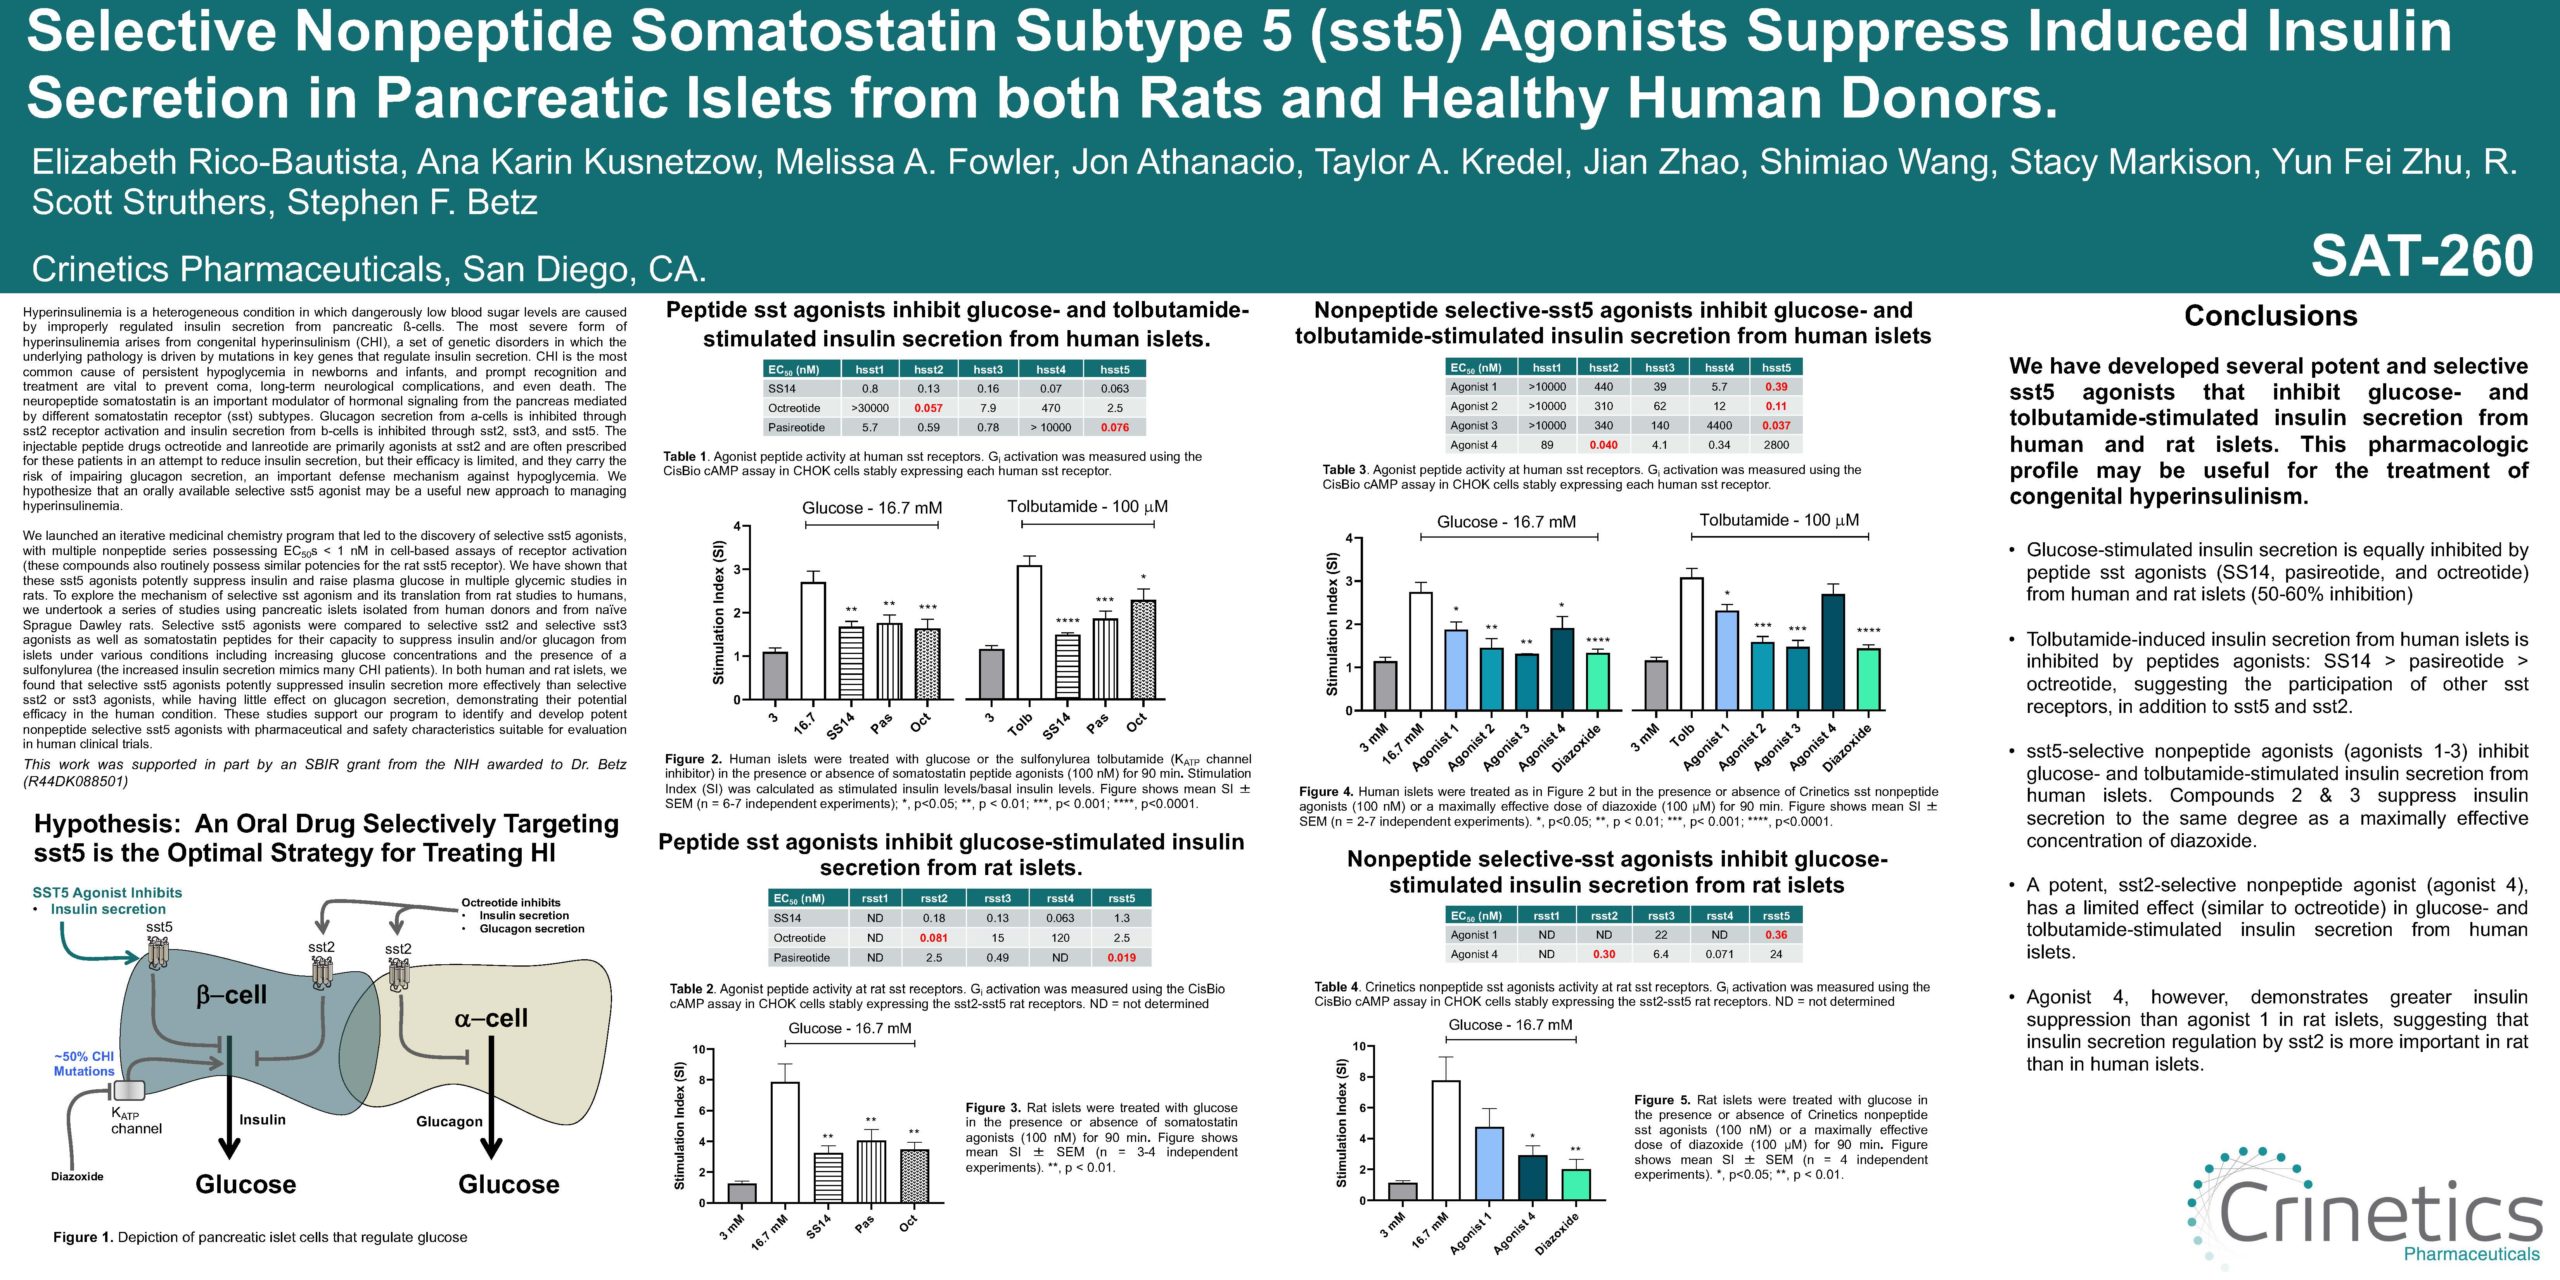 Selective Nonpeptide Somatostatin Subtype 5 (sst5) Agonists Suppress Induced Insulin Secretion in Pancreatic Islets from both Rats and Healthy Human Donors.